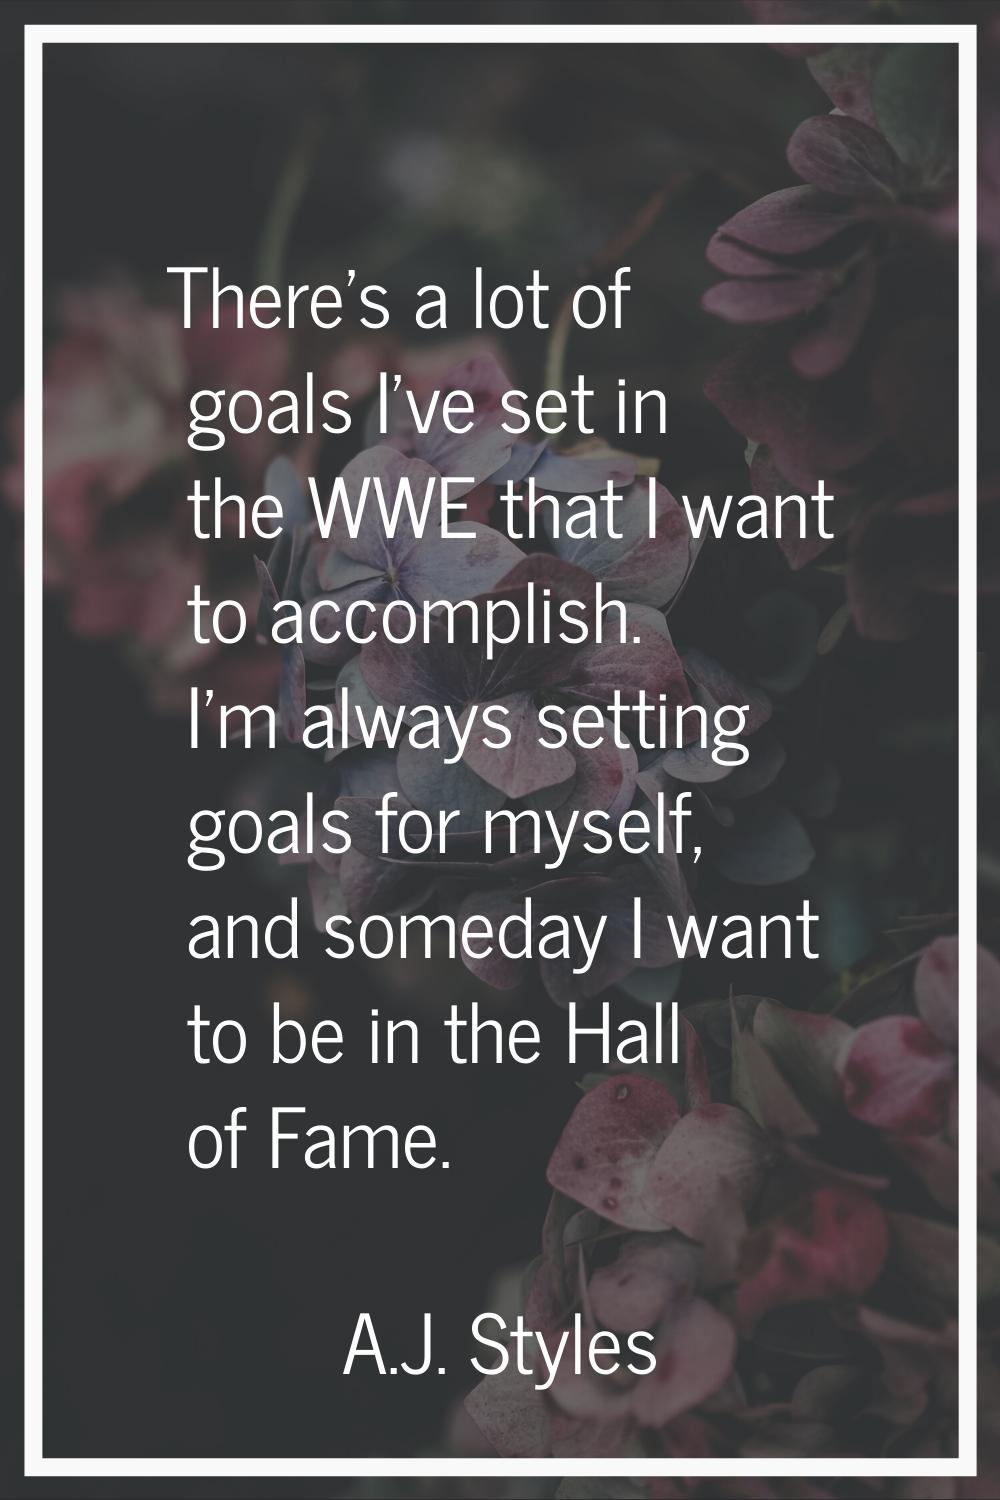 There's a lot of goals I've set in the WWE that I want to accomplish. I'm always setting goals for 